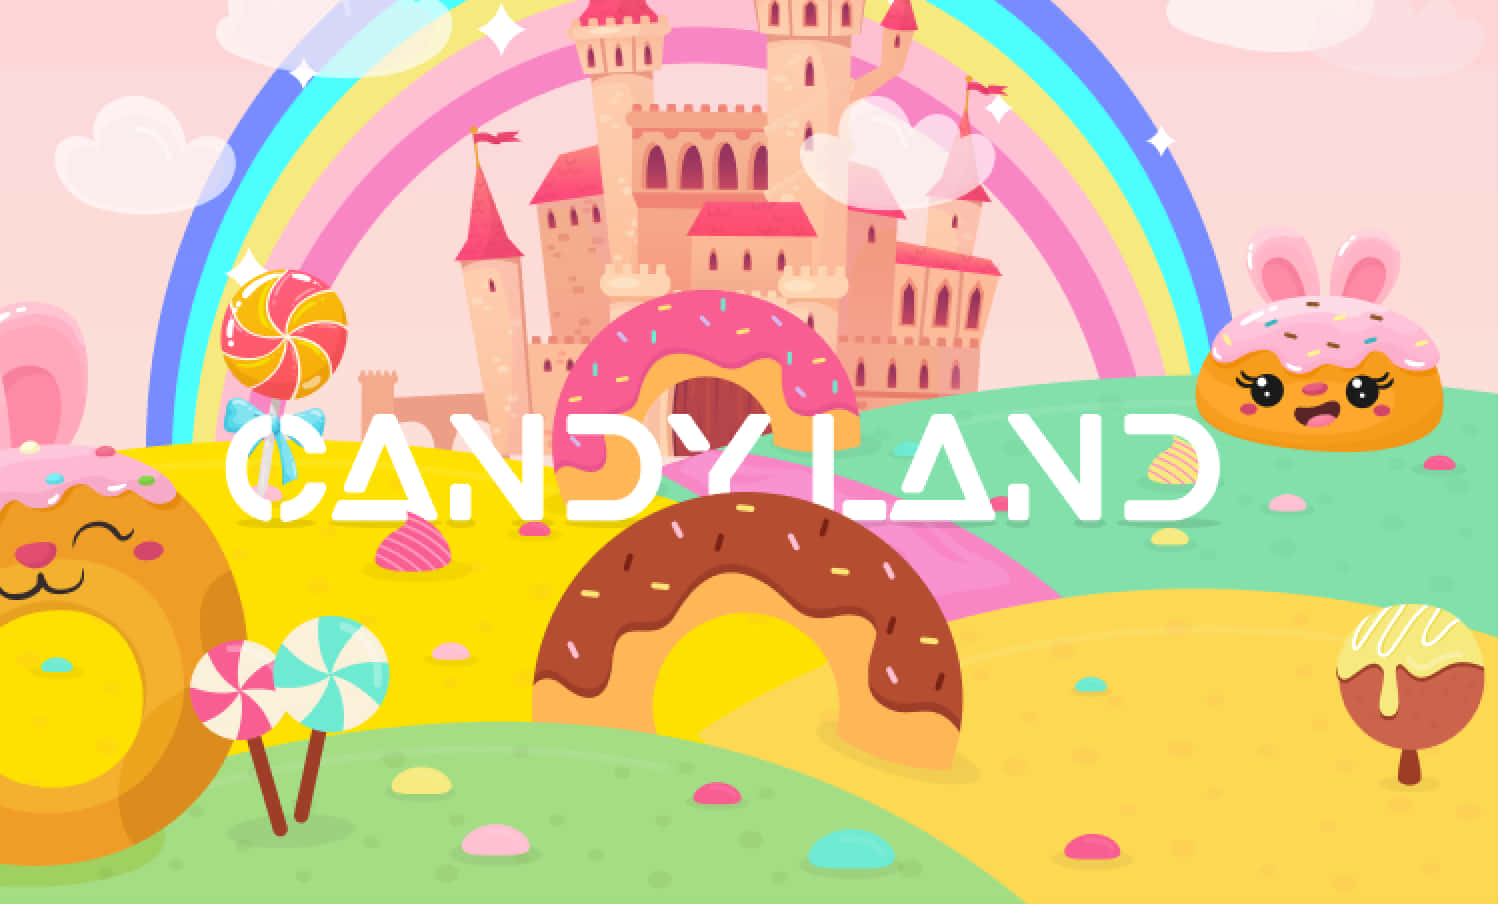 Get lost in a world of sugary sweetness at Candy Land Wallpaper